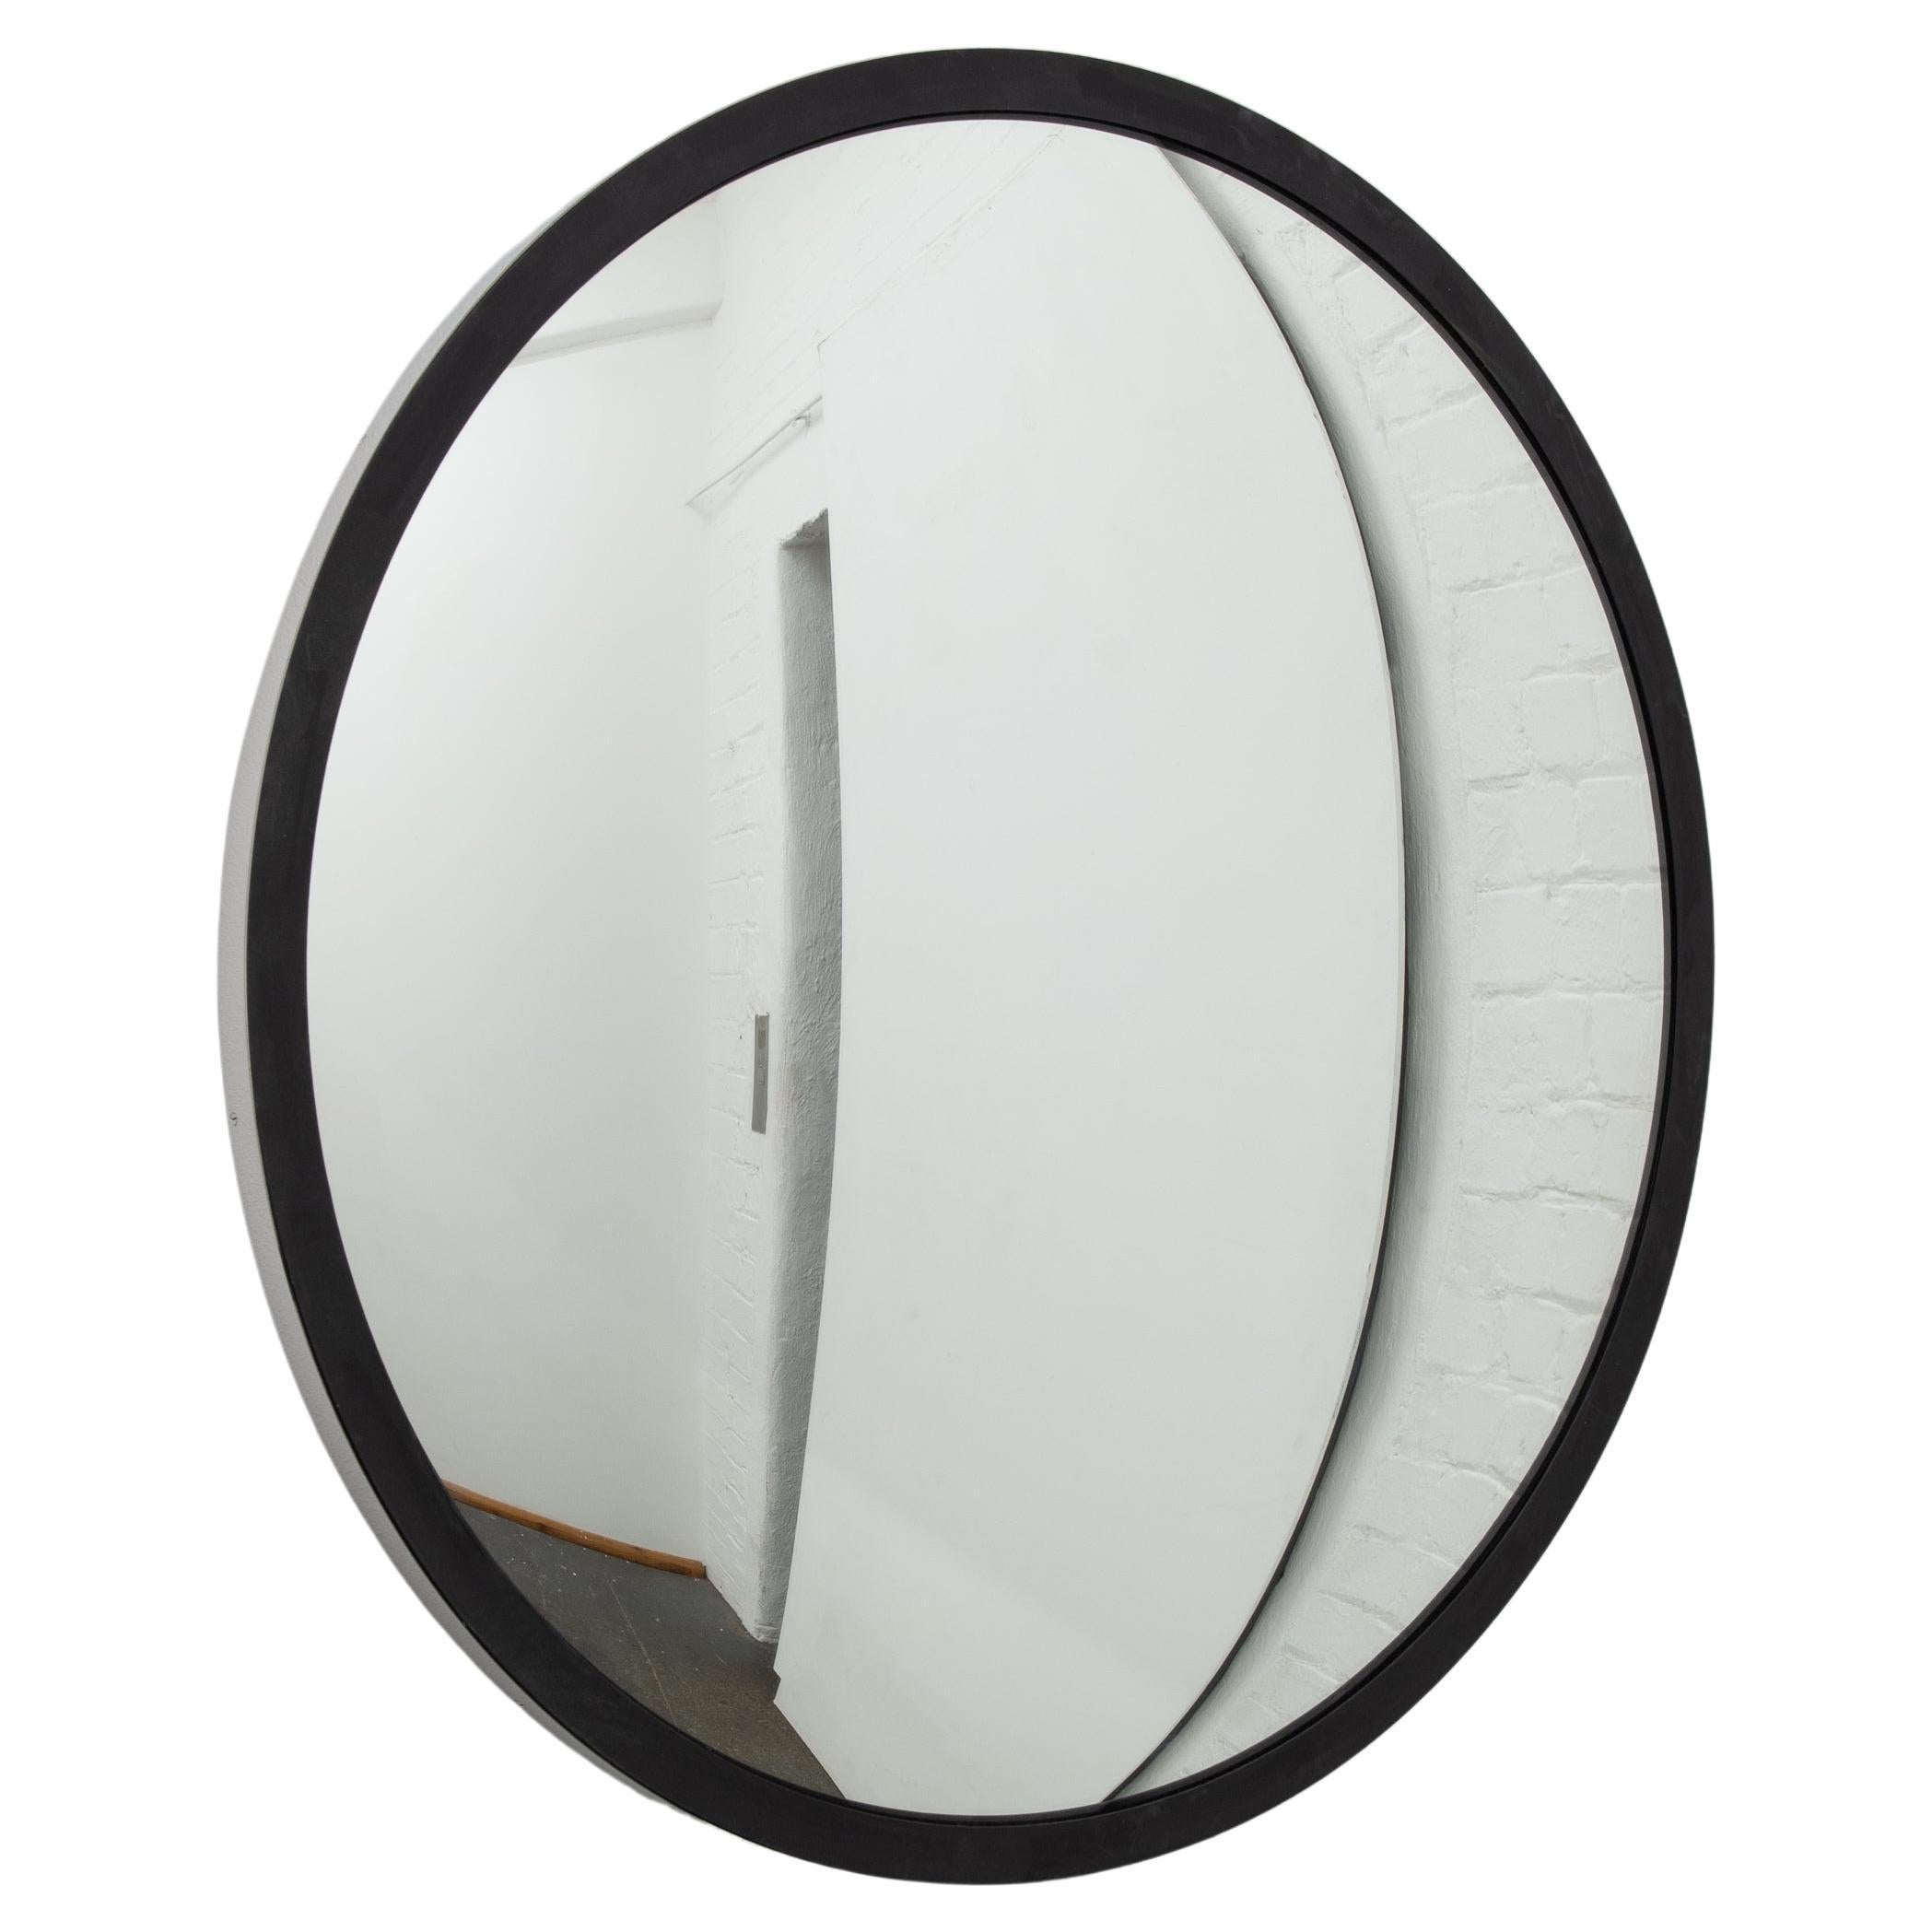 Orbis Handcrafted Round Convex Mirror, Stainless Steel and Black Frame, Large